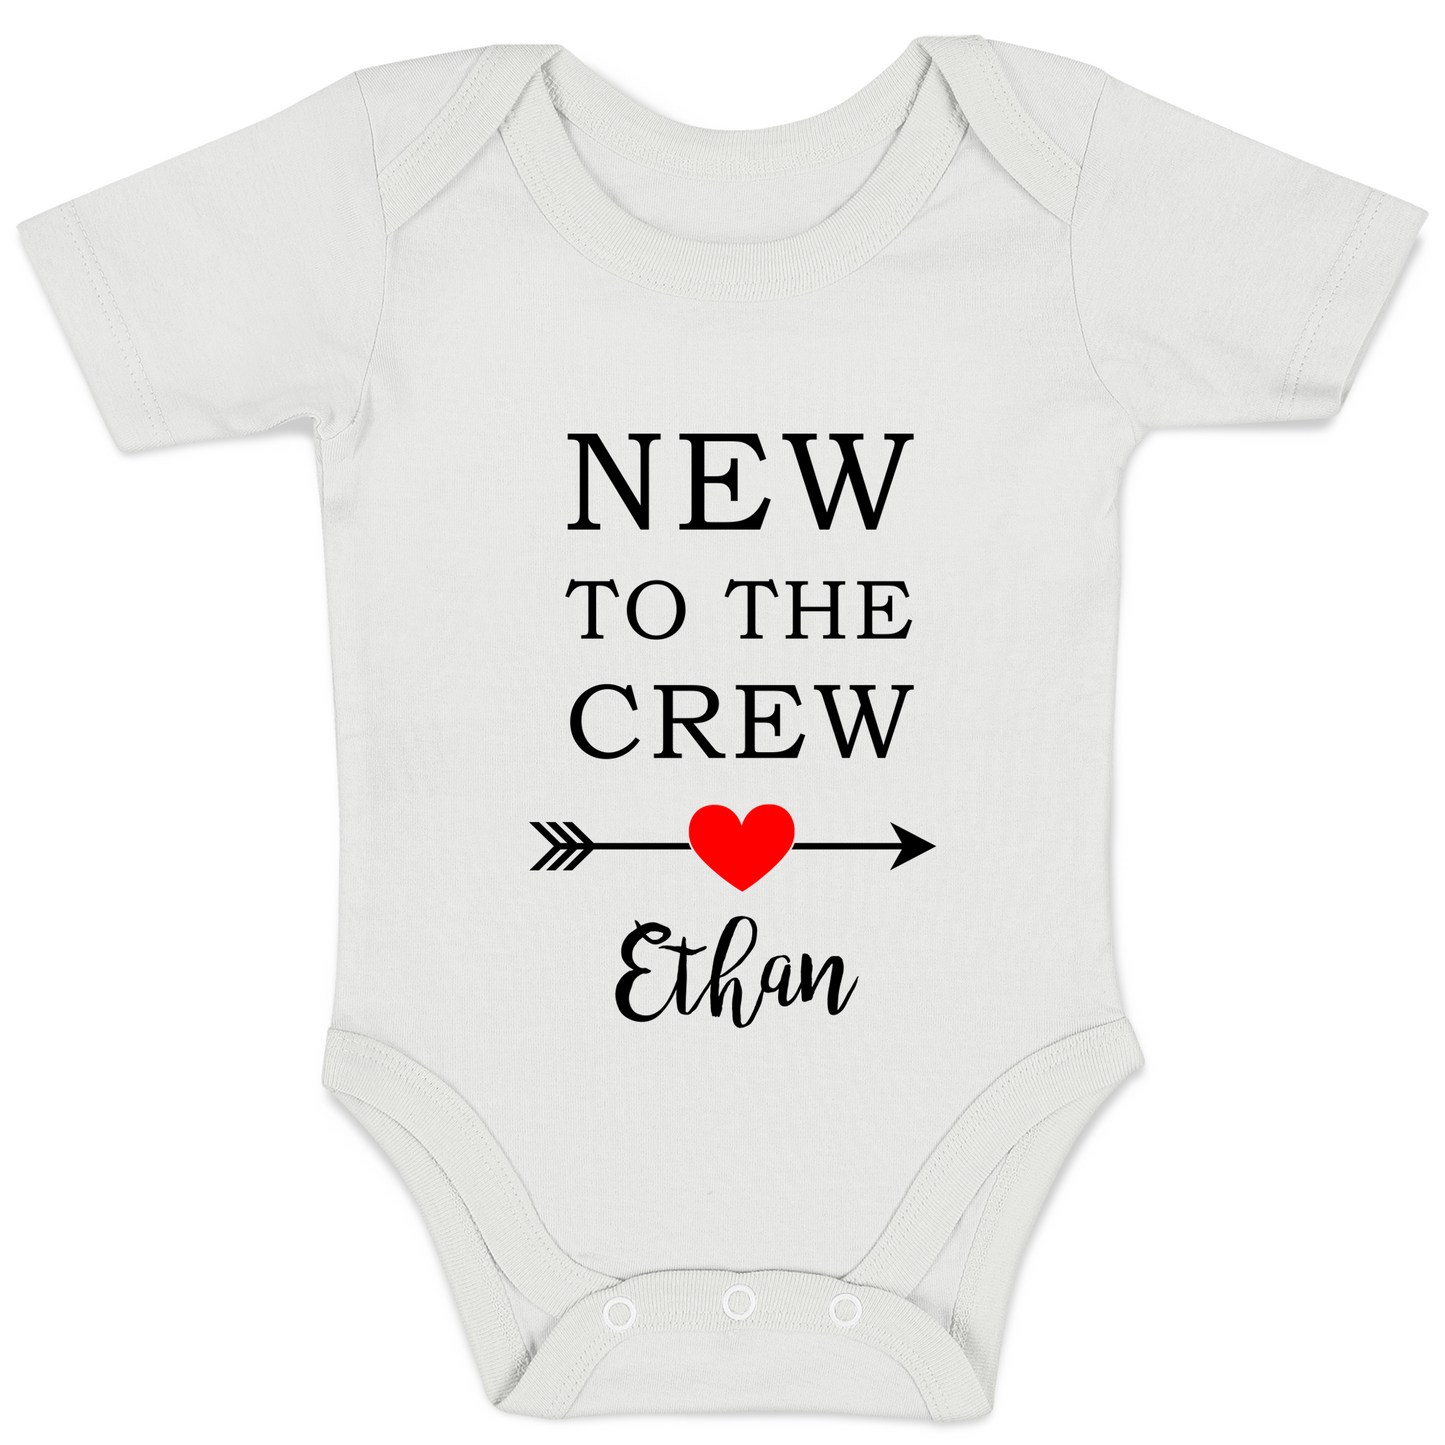 [Personalized] Endanzoo Pregnancy Baby Reveal Organic Baby Bodysuit - New To The Crew